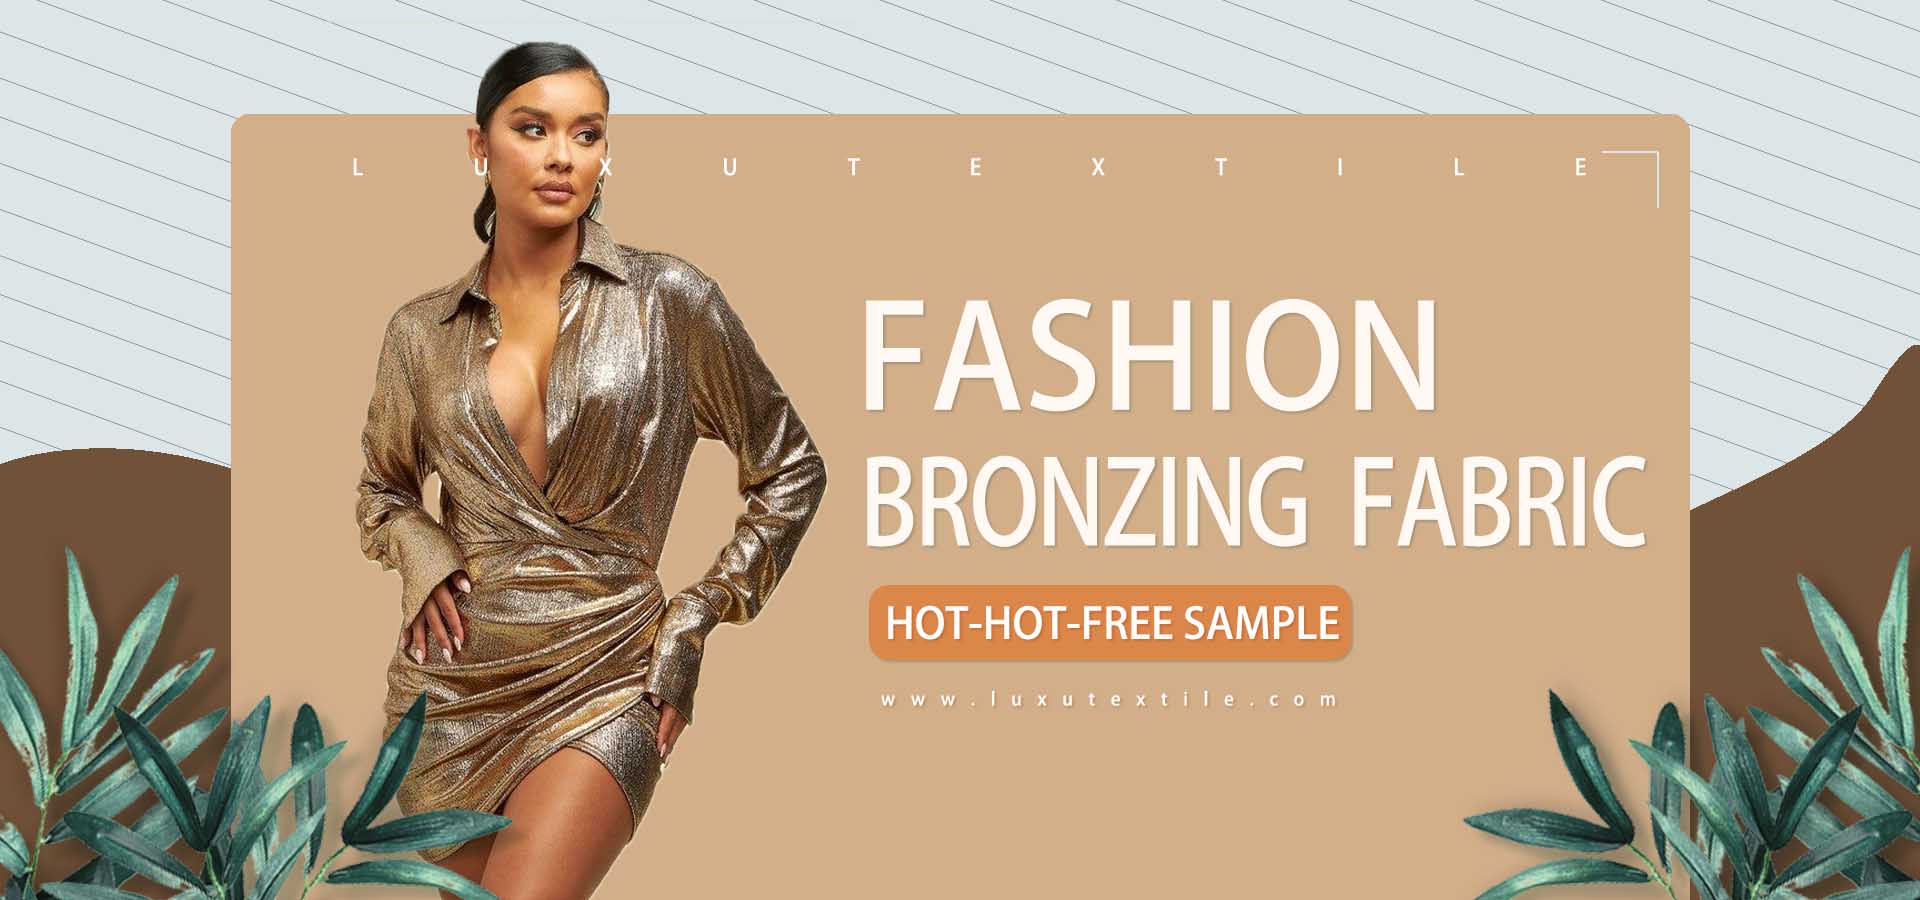 What is fashion summer bronzing fabric?